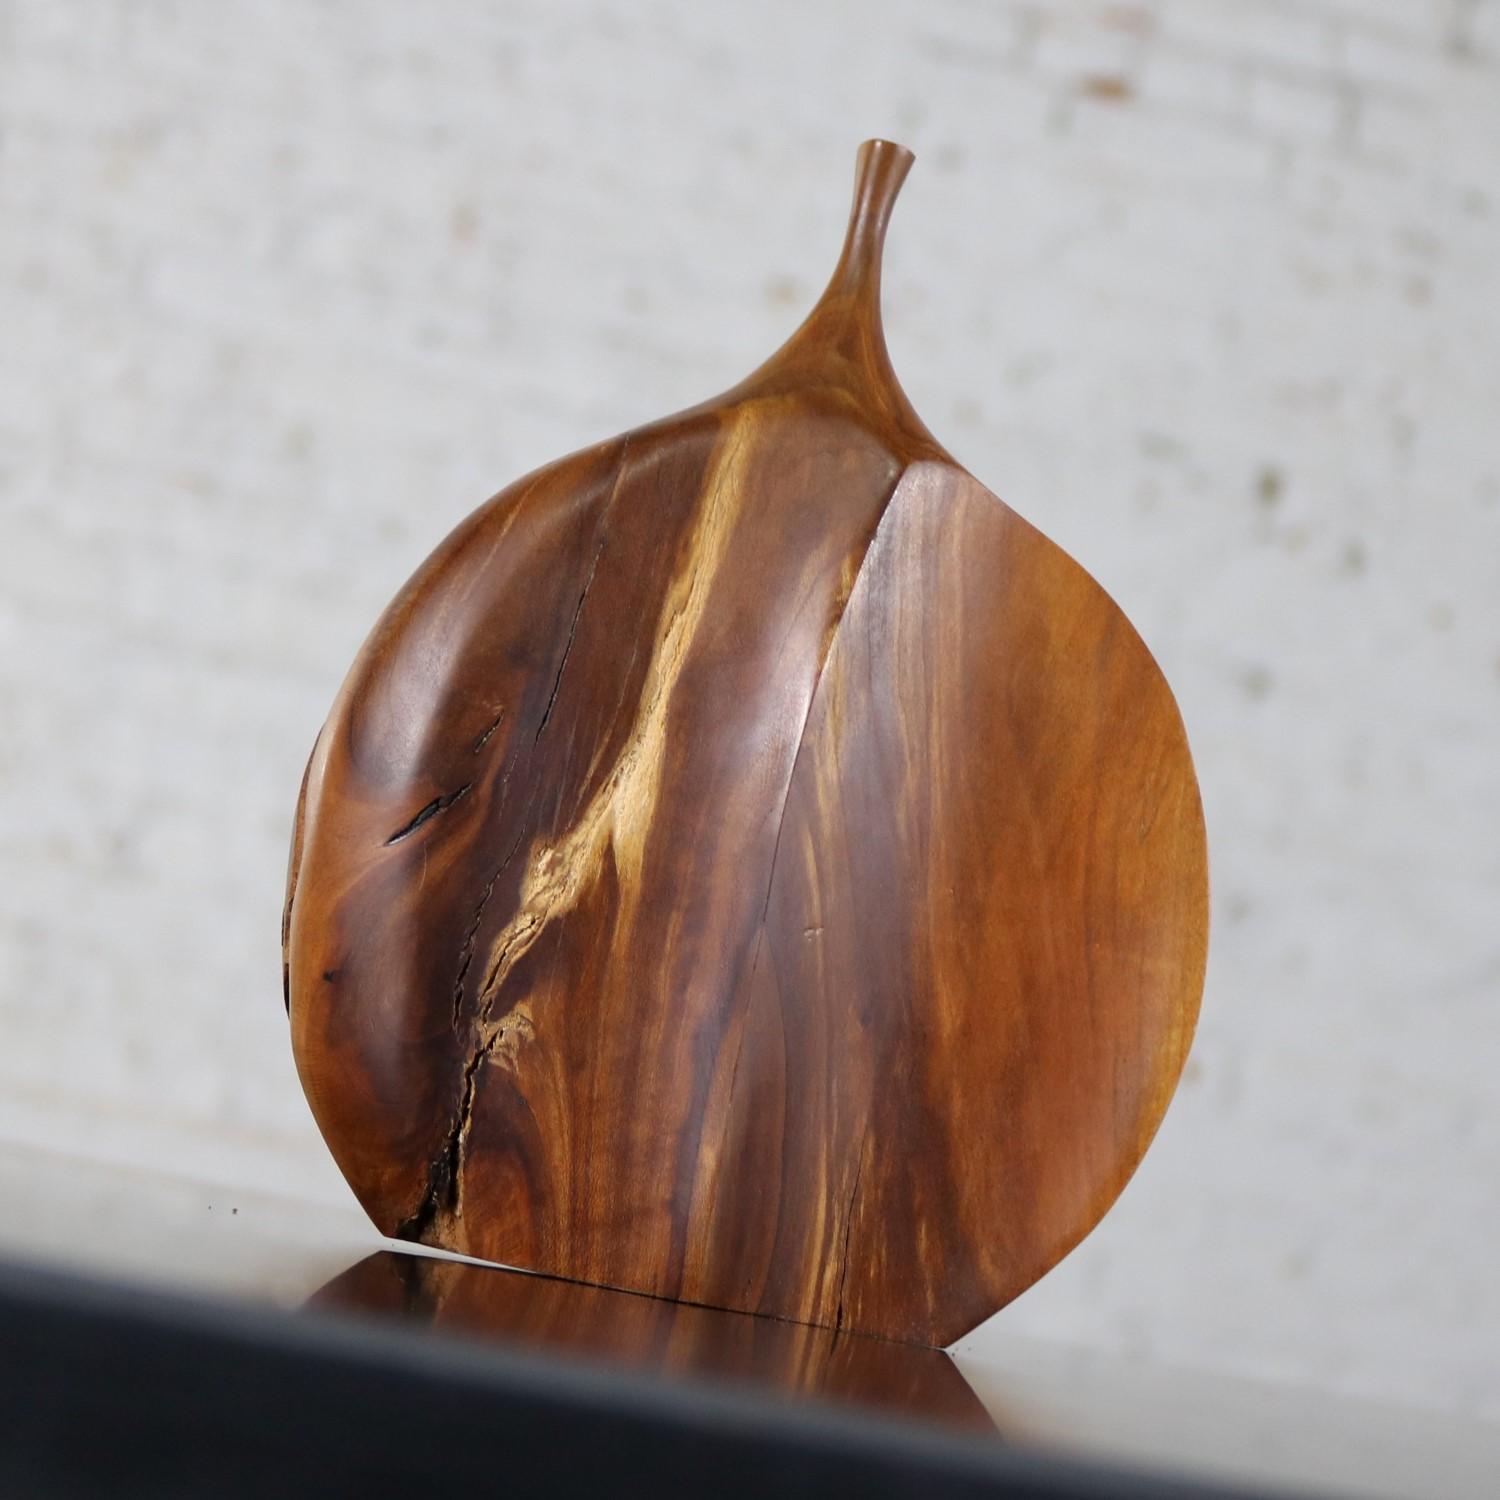 Handsome Mid-Century Modern asymmetrical weed vase by Doug Ayers. This Fine art turned apricot wood piece has natural bark on one side and a smooth peaked surface on the other. It is signed and dated 7/14/69. It is in wonderful vintage condition